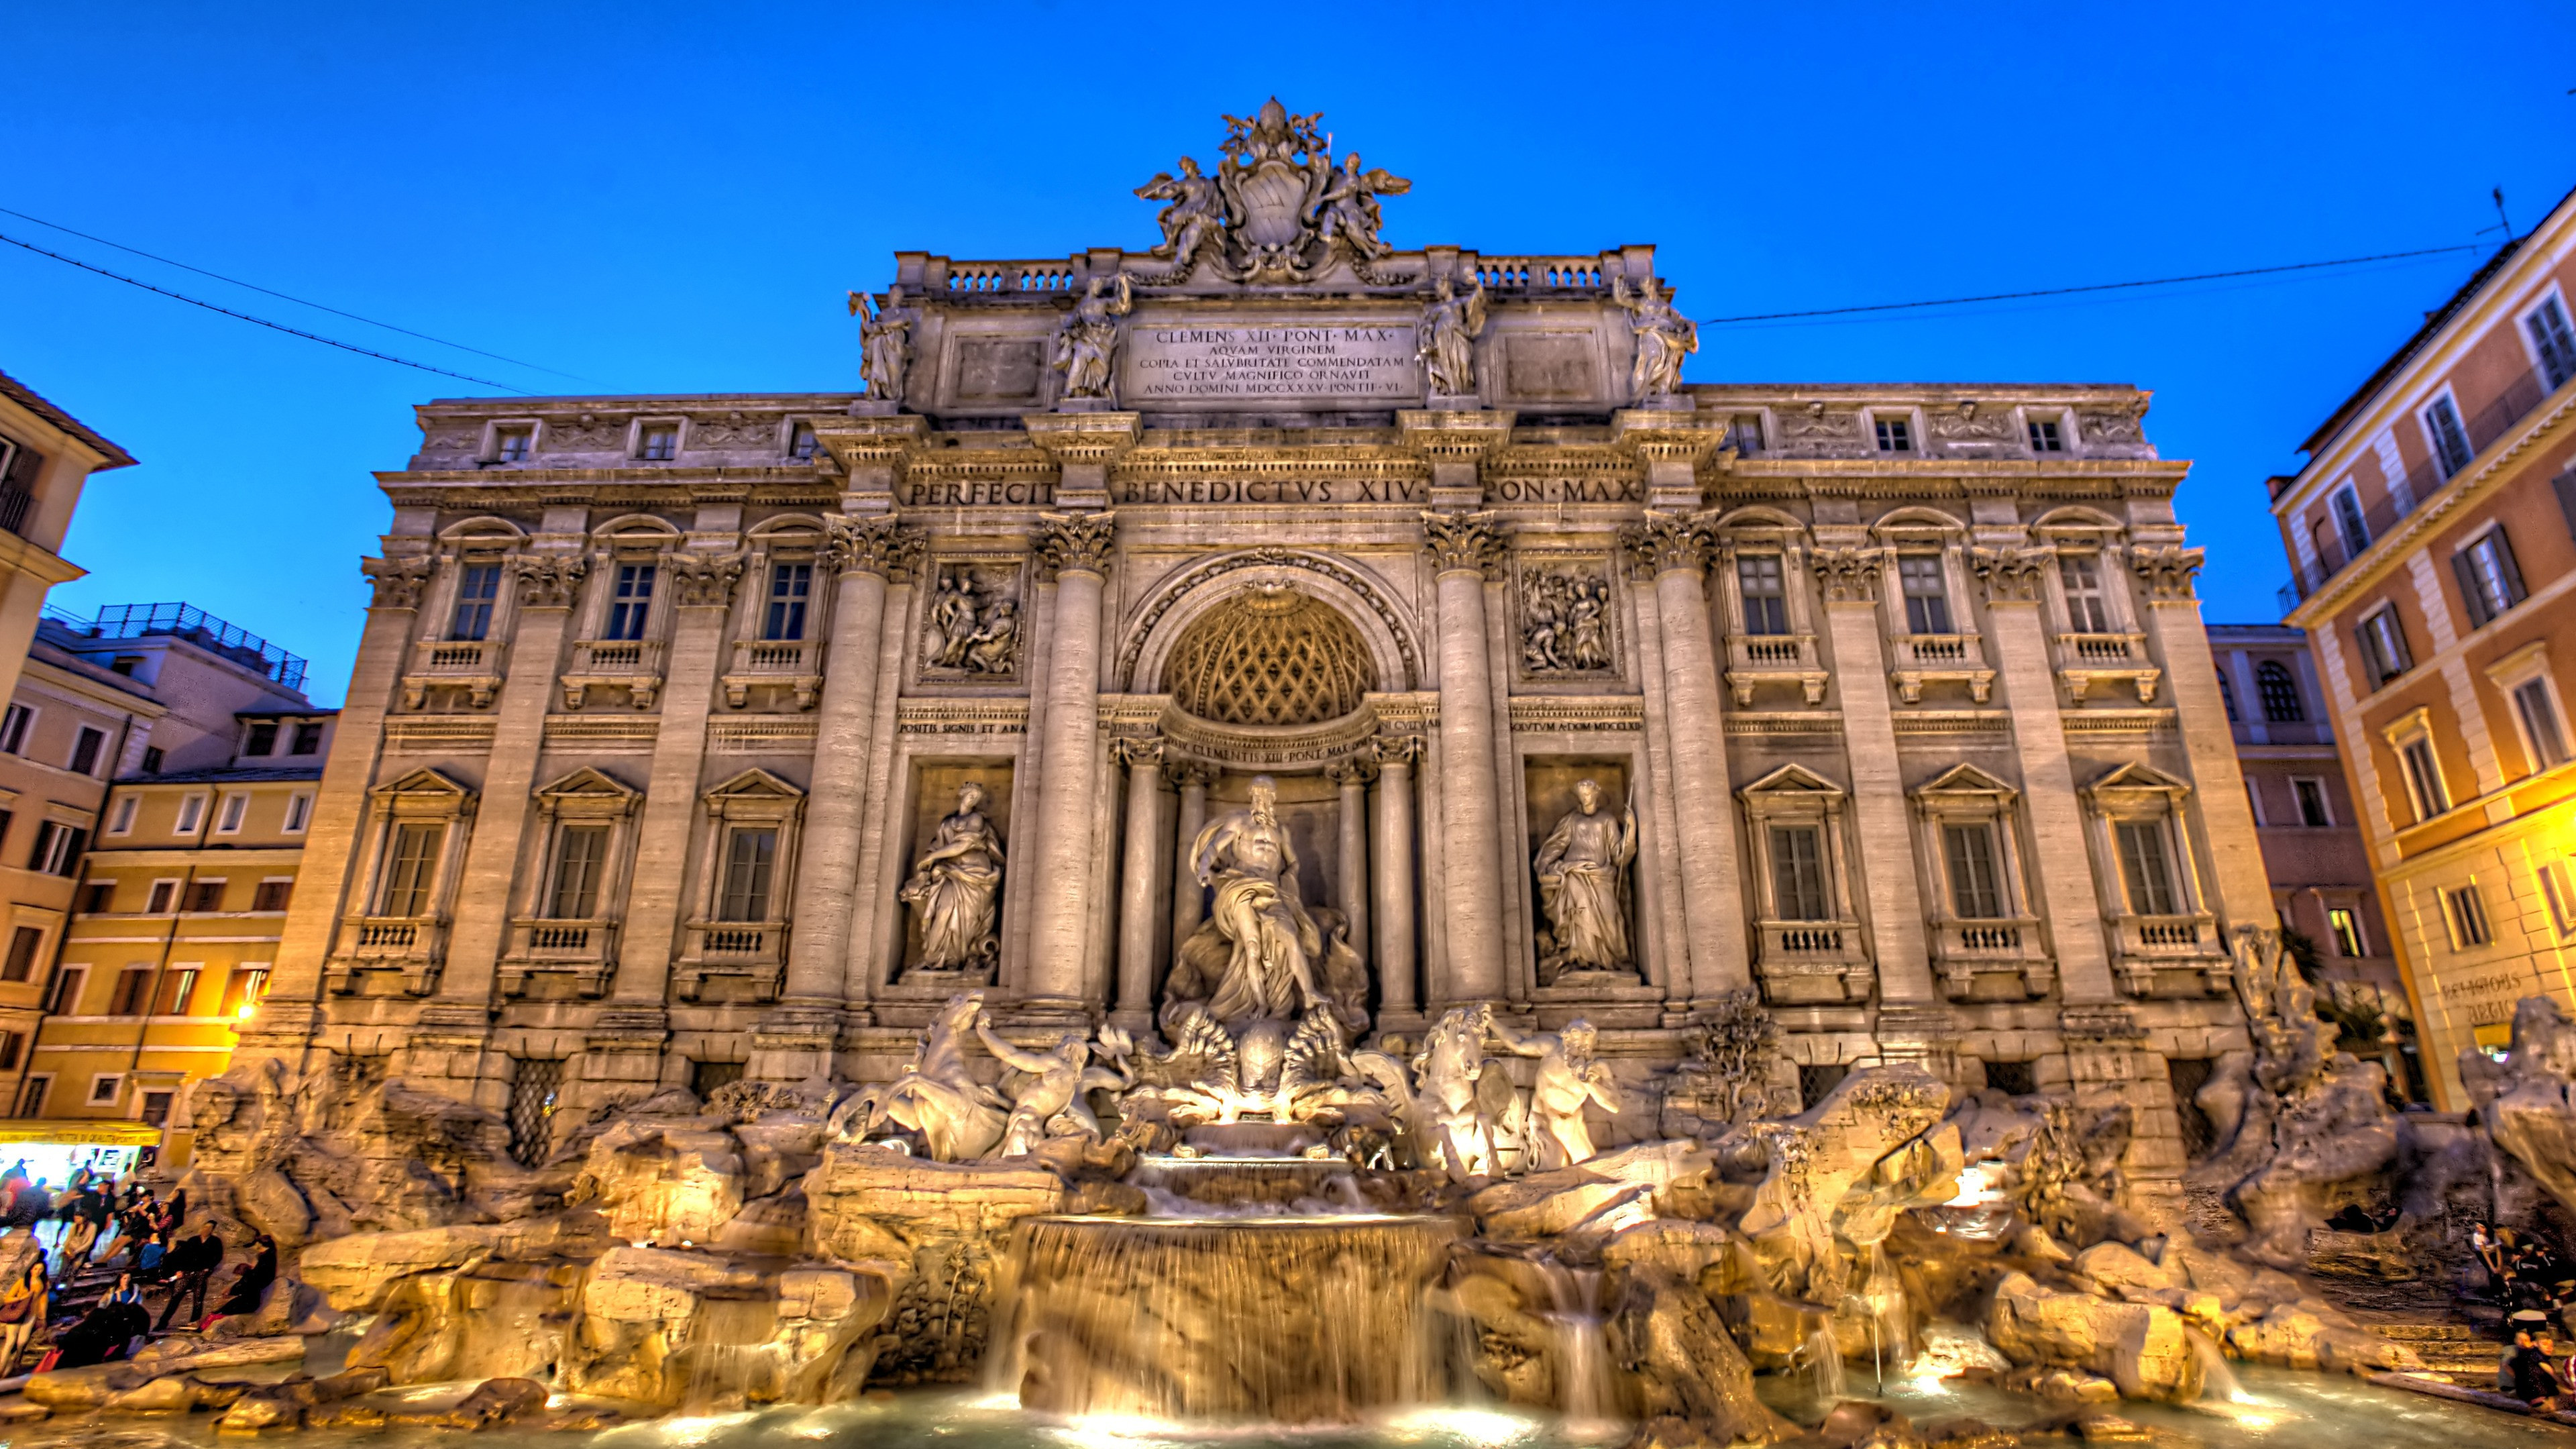 Rome: Trevi Fountain, designed by Italian architect Nicola Salvi and completed by Giuseppe Pannini and several others. 3840x2160 4K Background.